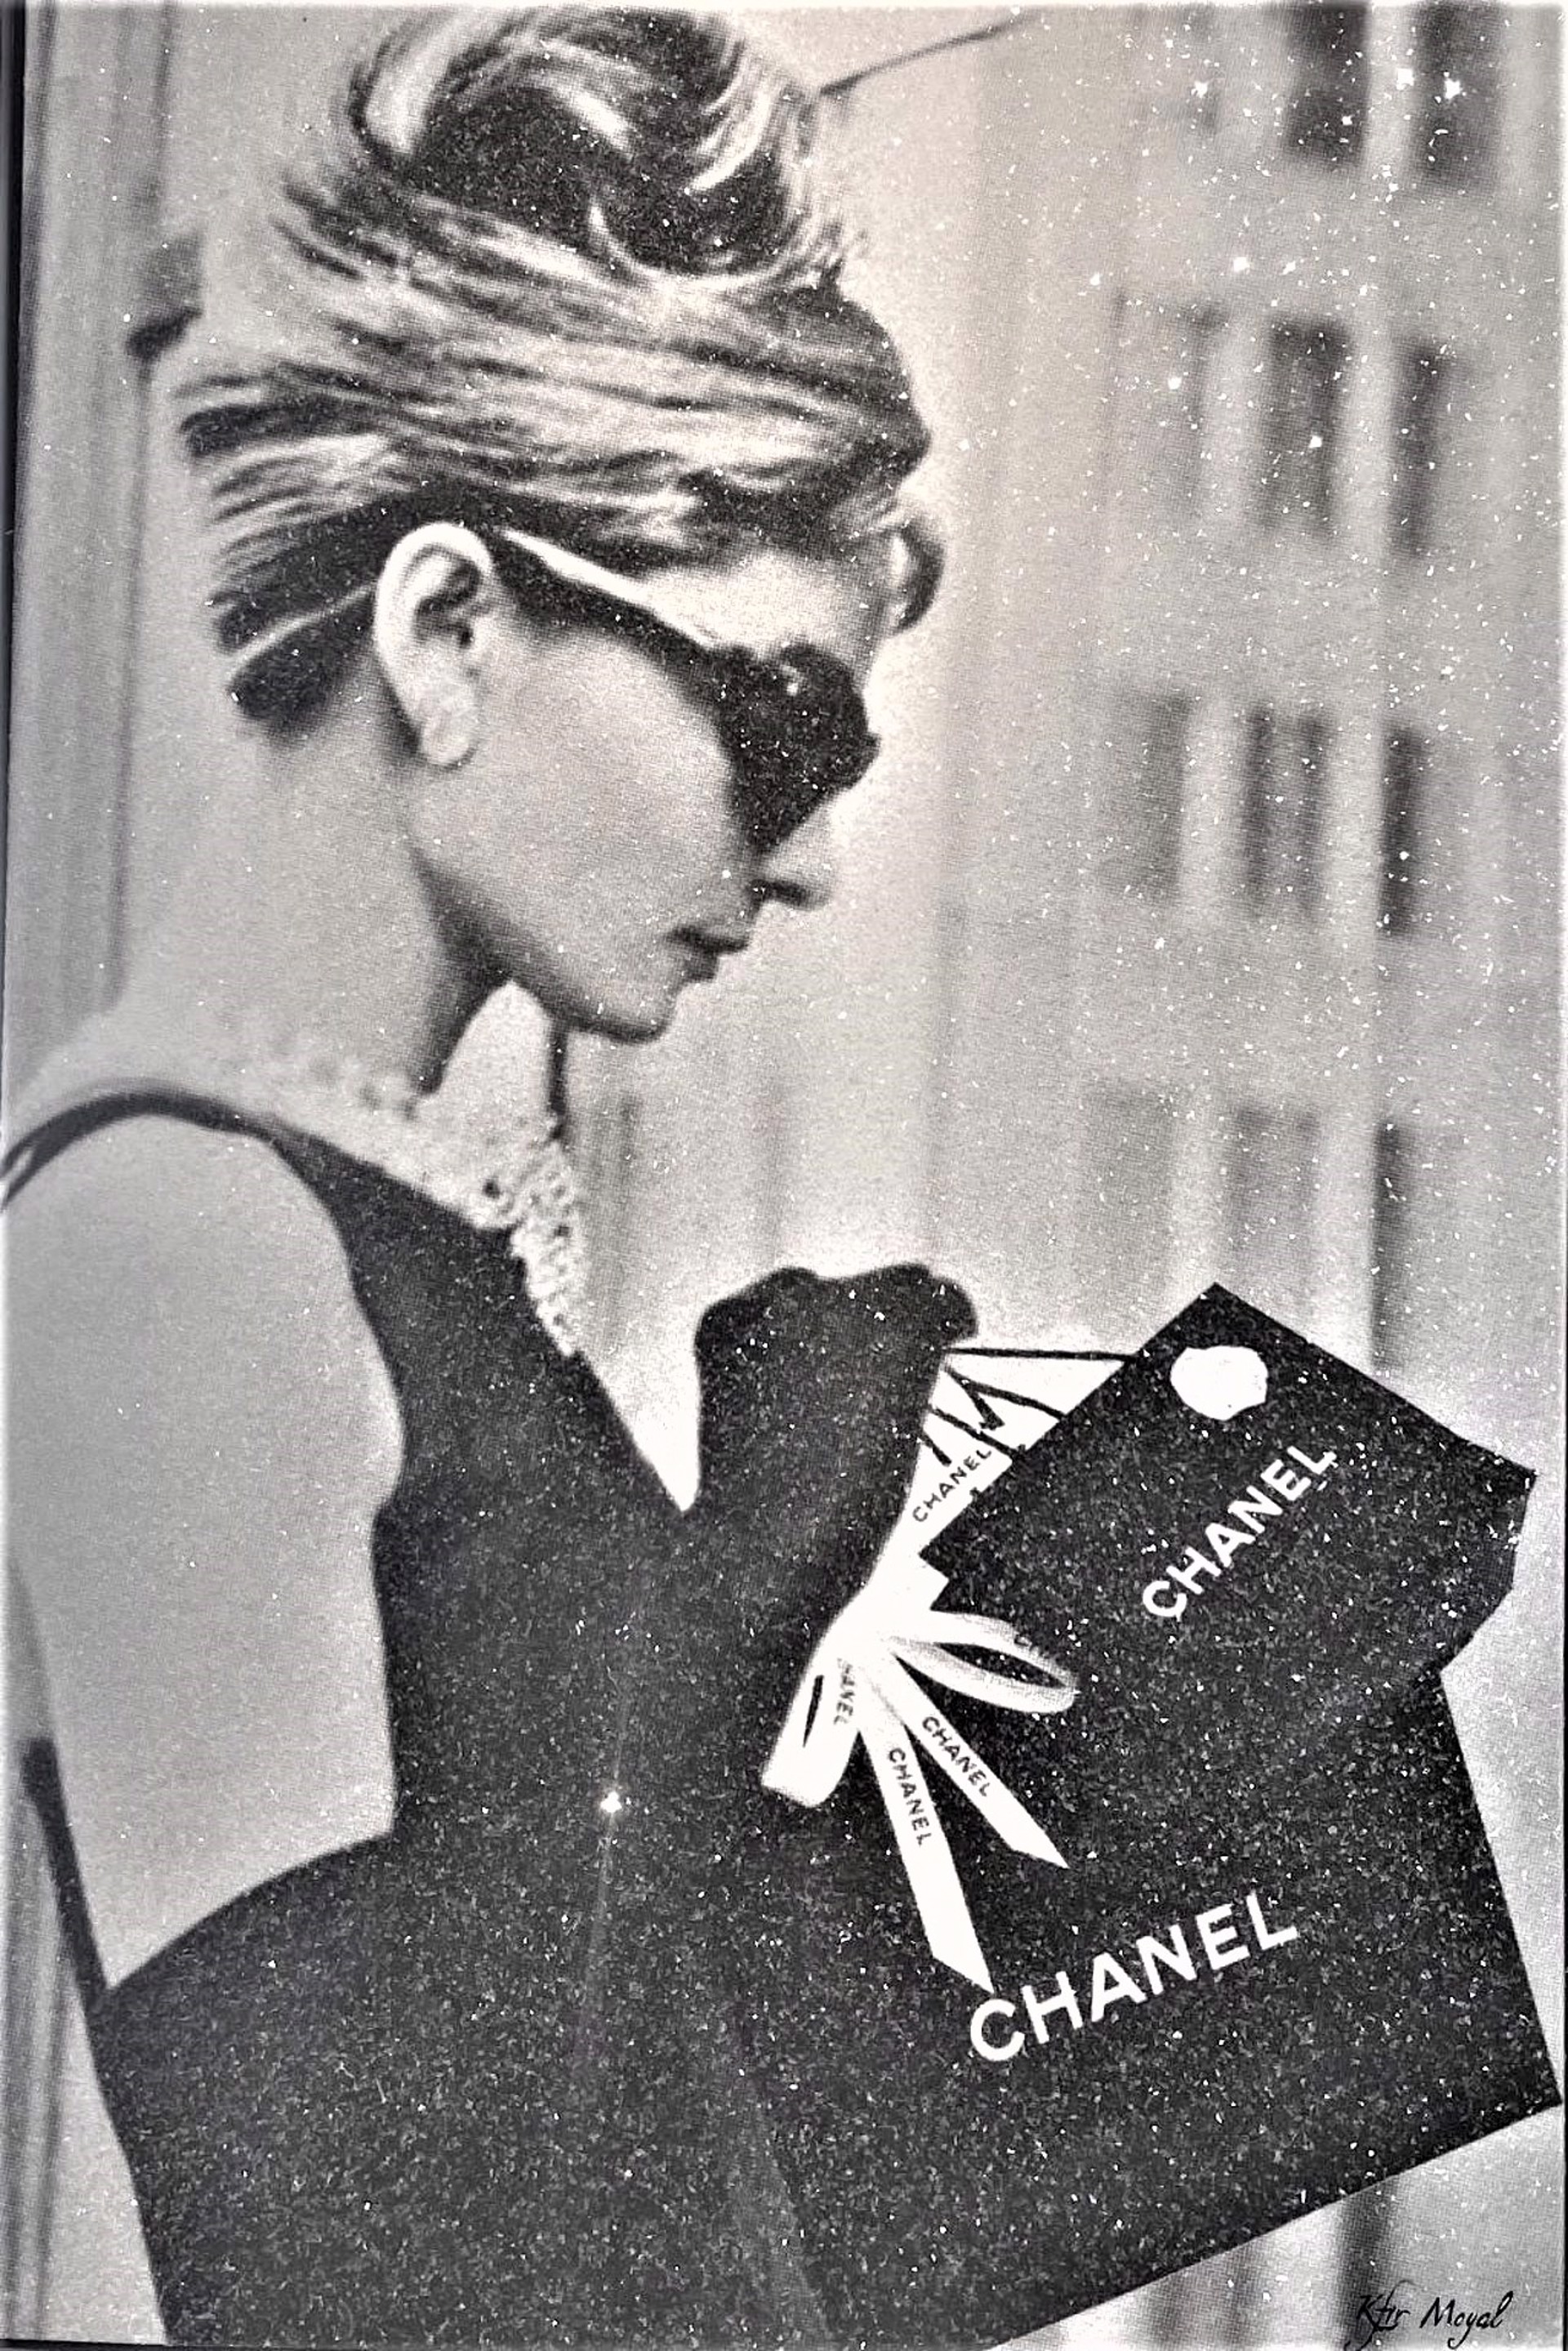 Audrey Hepburn with Chanel by Kfir Moyal